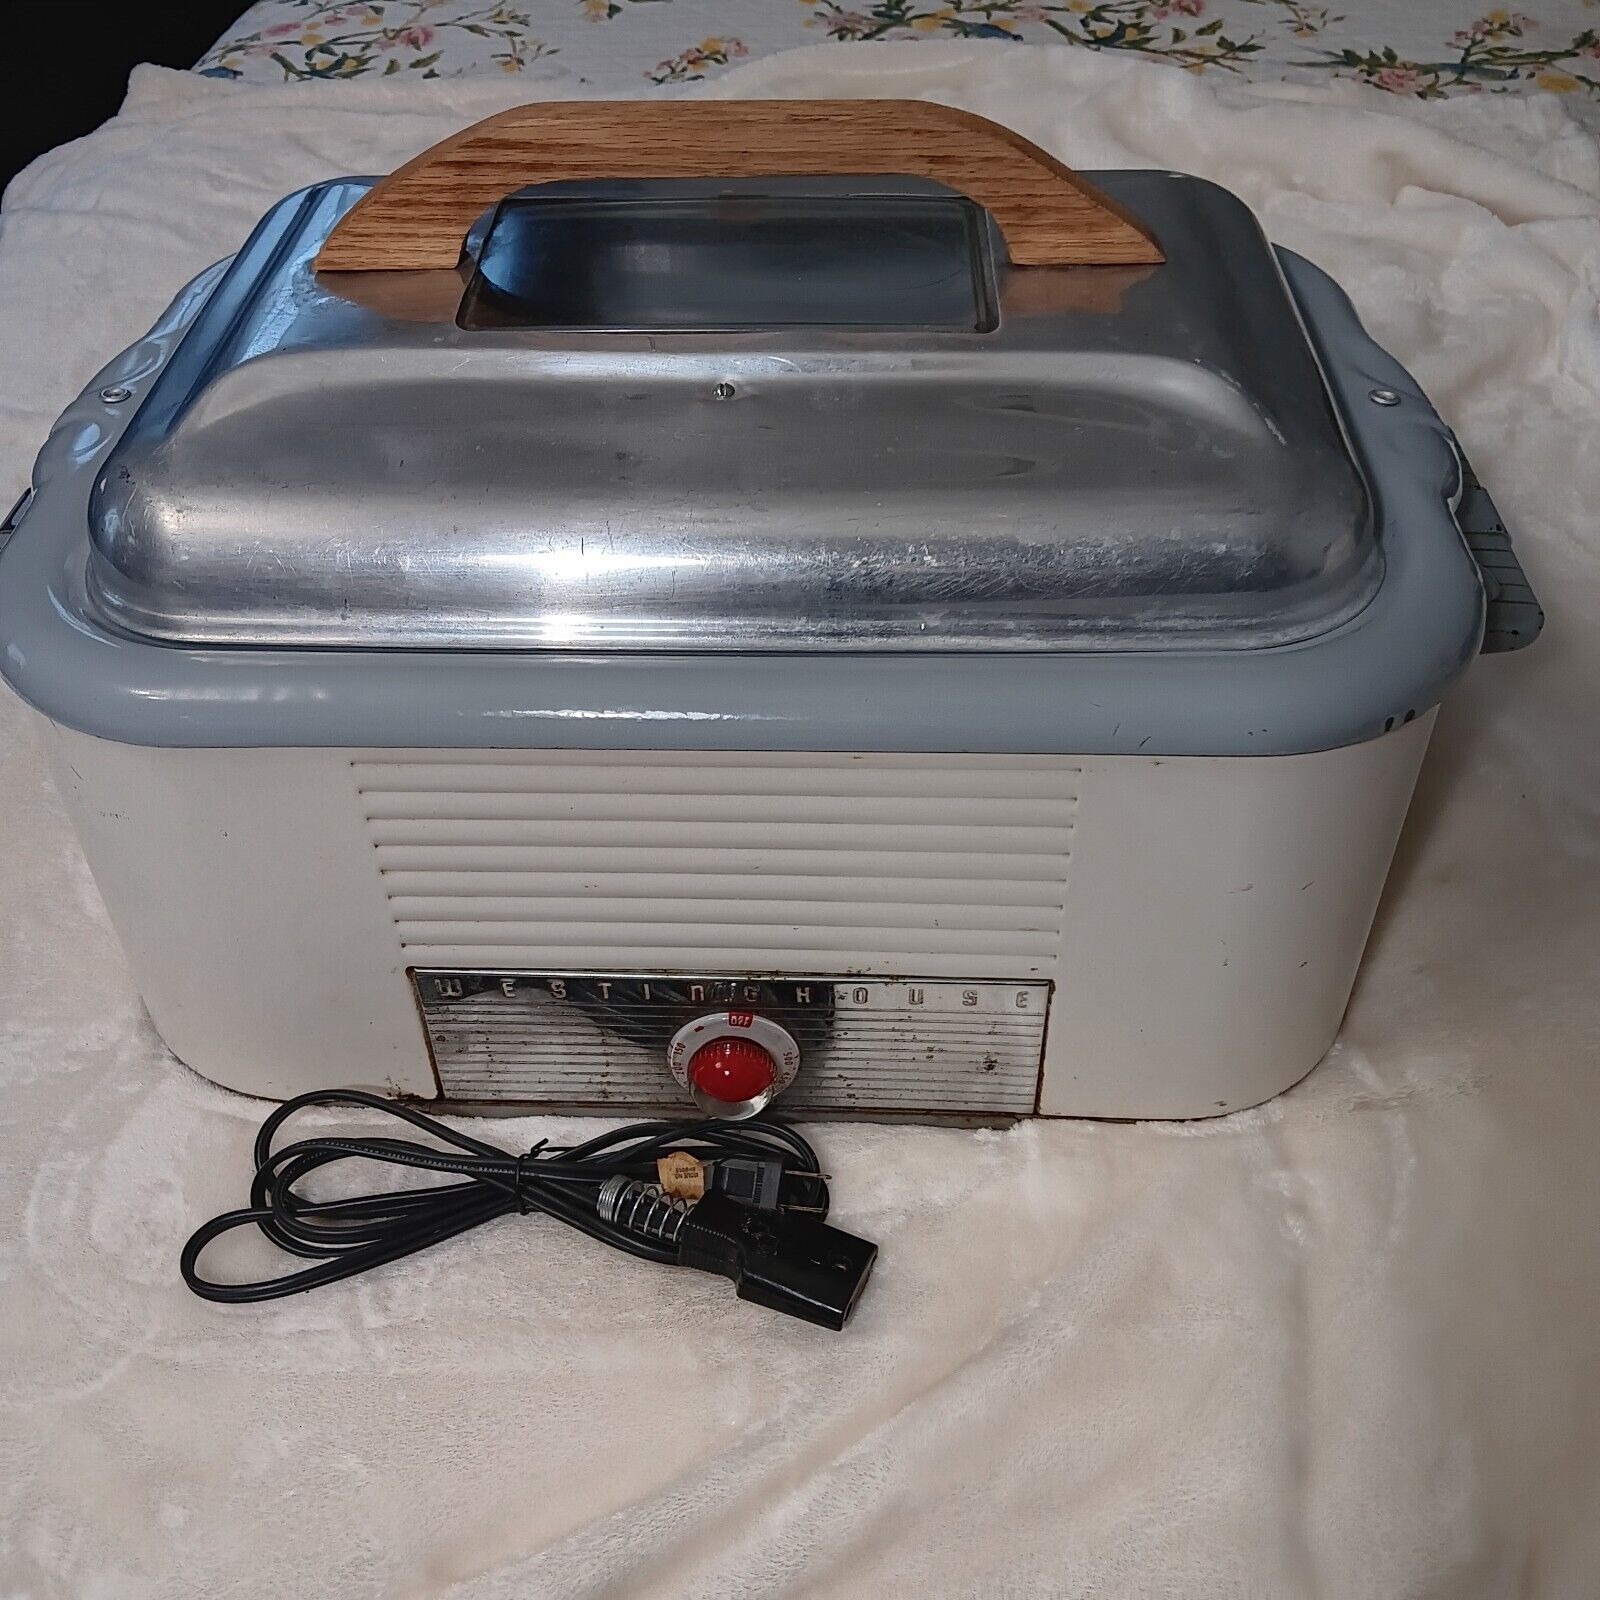 Vintage 1950s Westinghouse Electric Roaster Oven RO-91  18 quarts WORKS